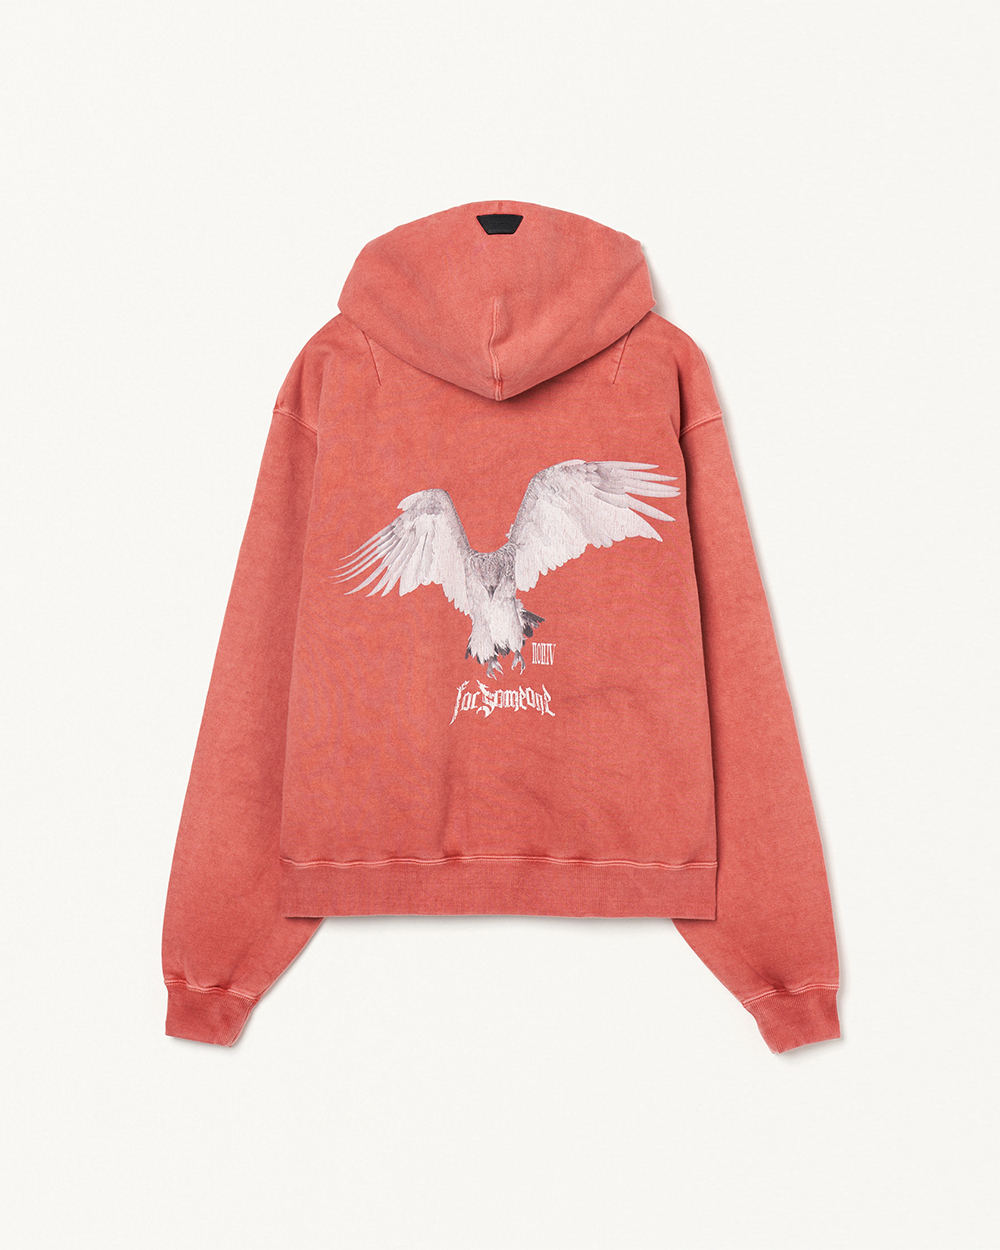 NY EAGLE ZIP HOODIE 詳細画像 Red 4